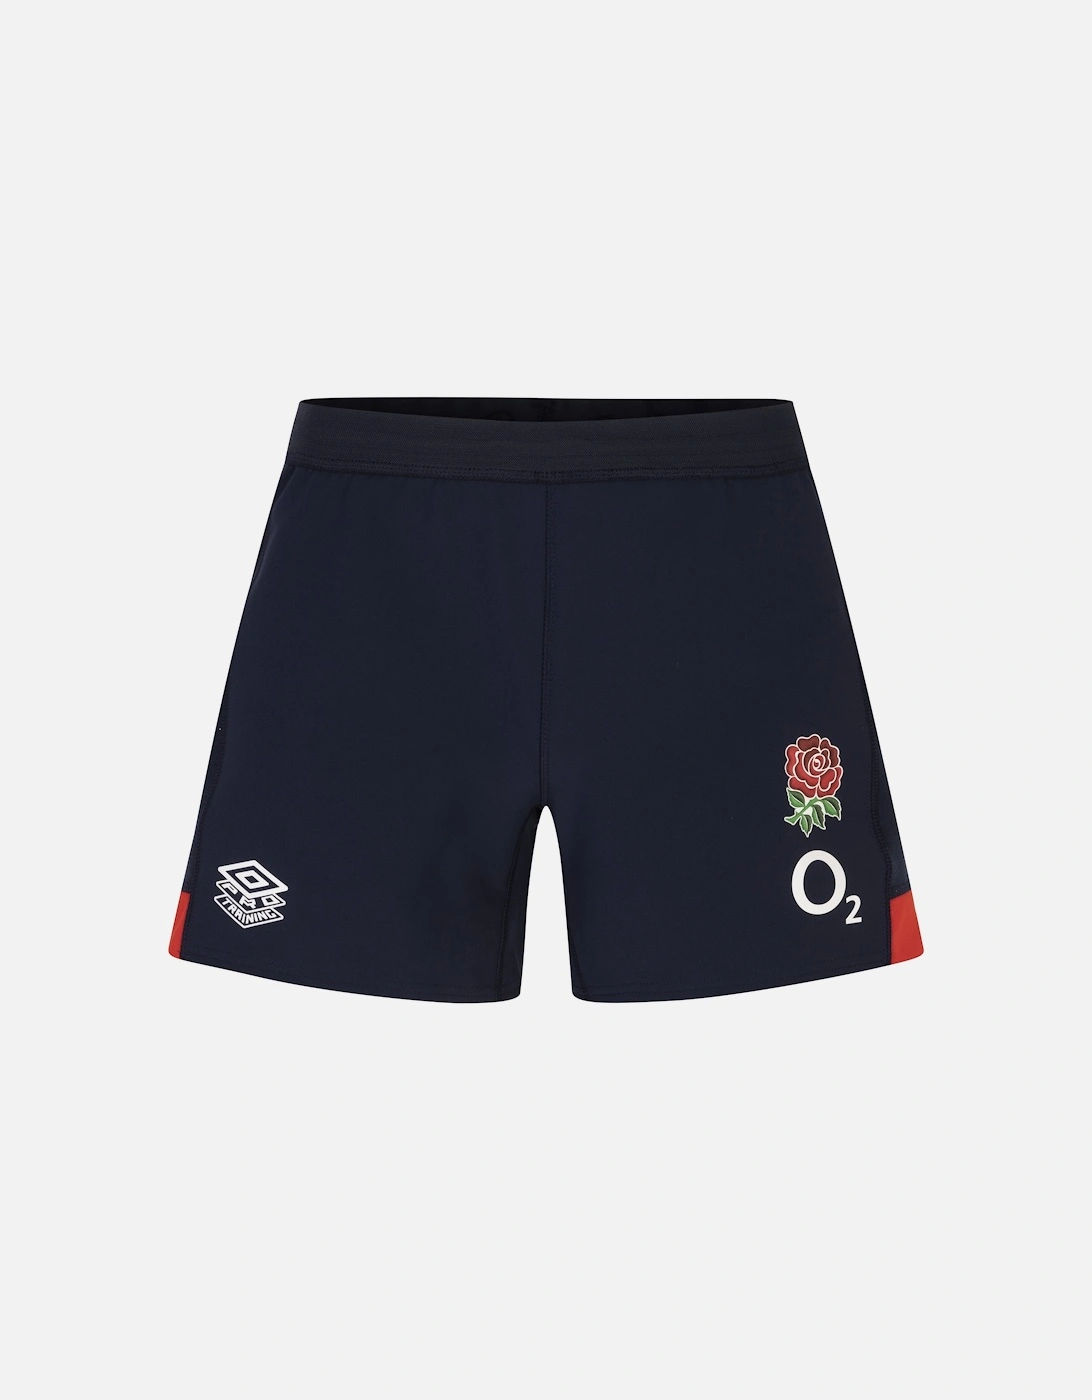 Mens 23/24 England Rugby Training Shorts, 5 of 4